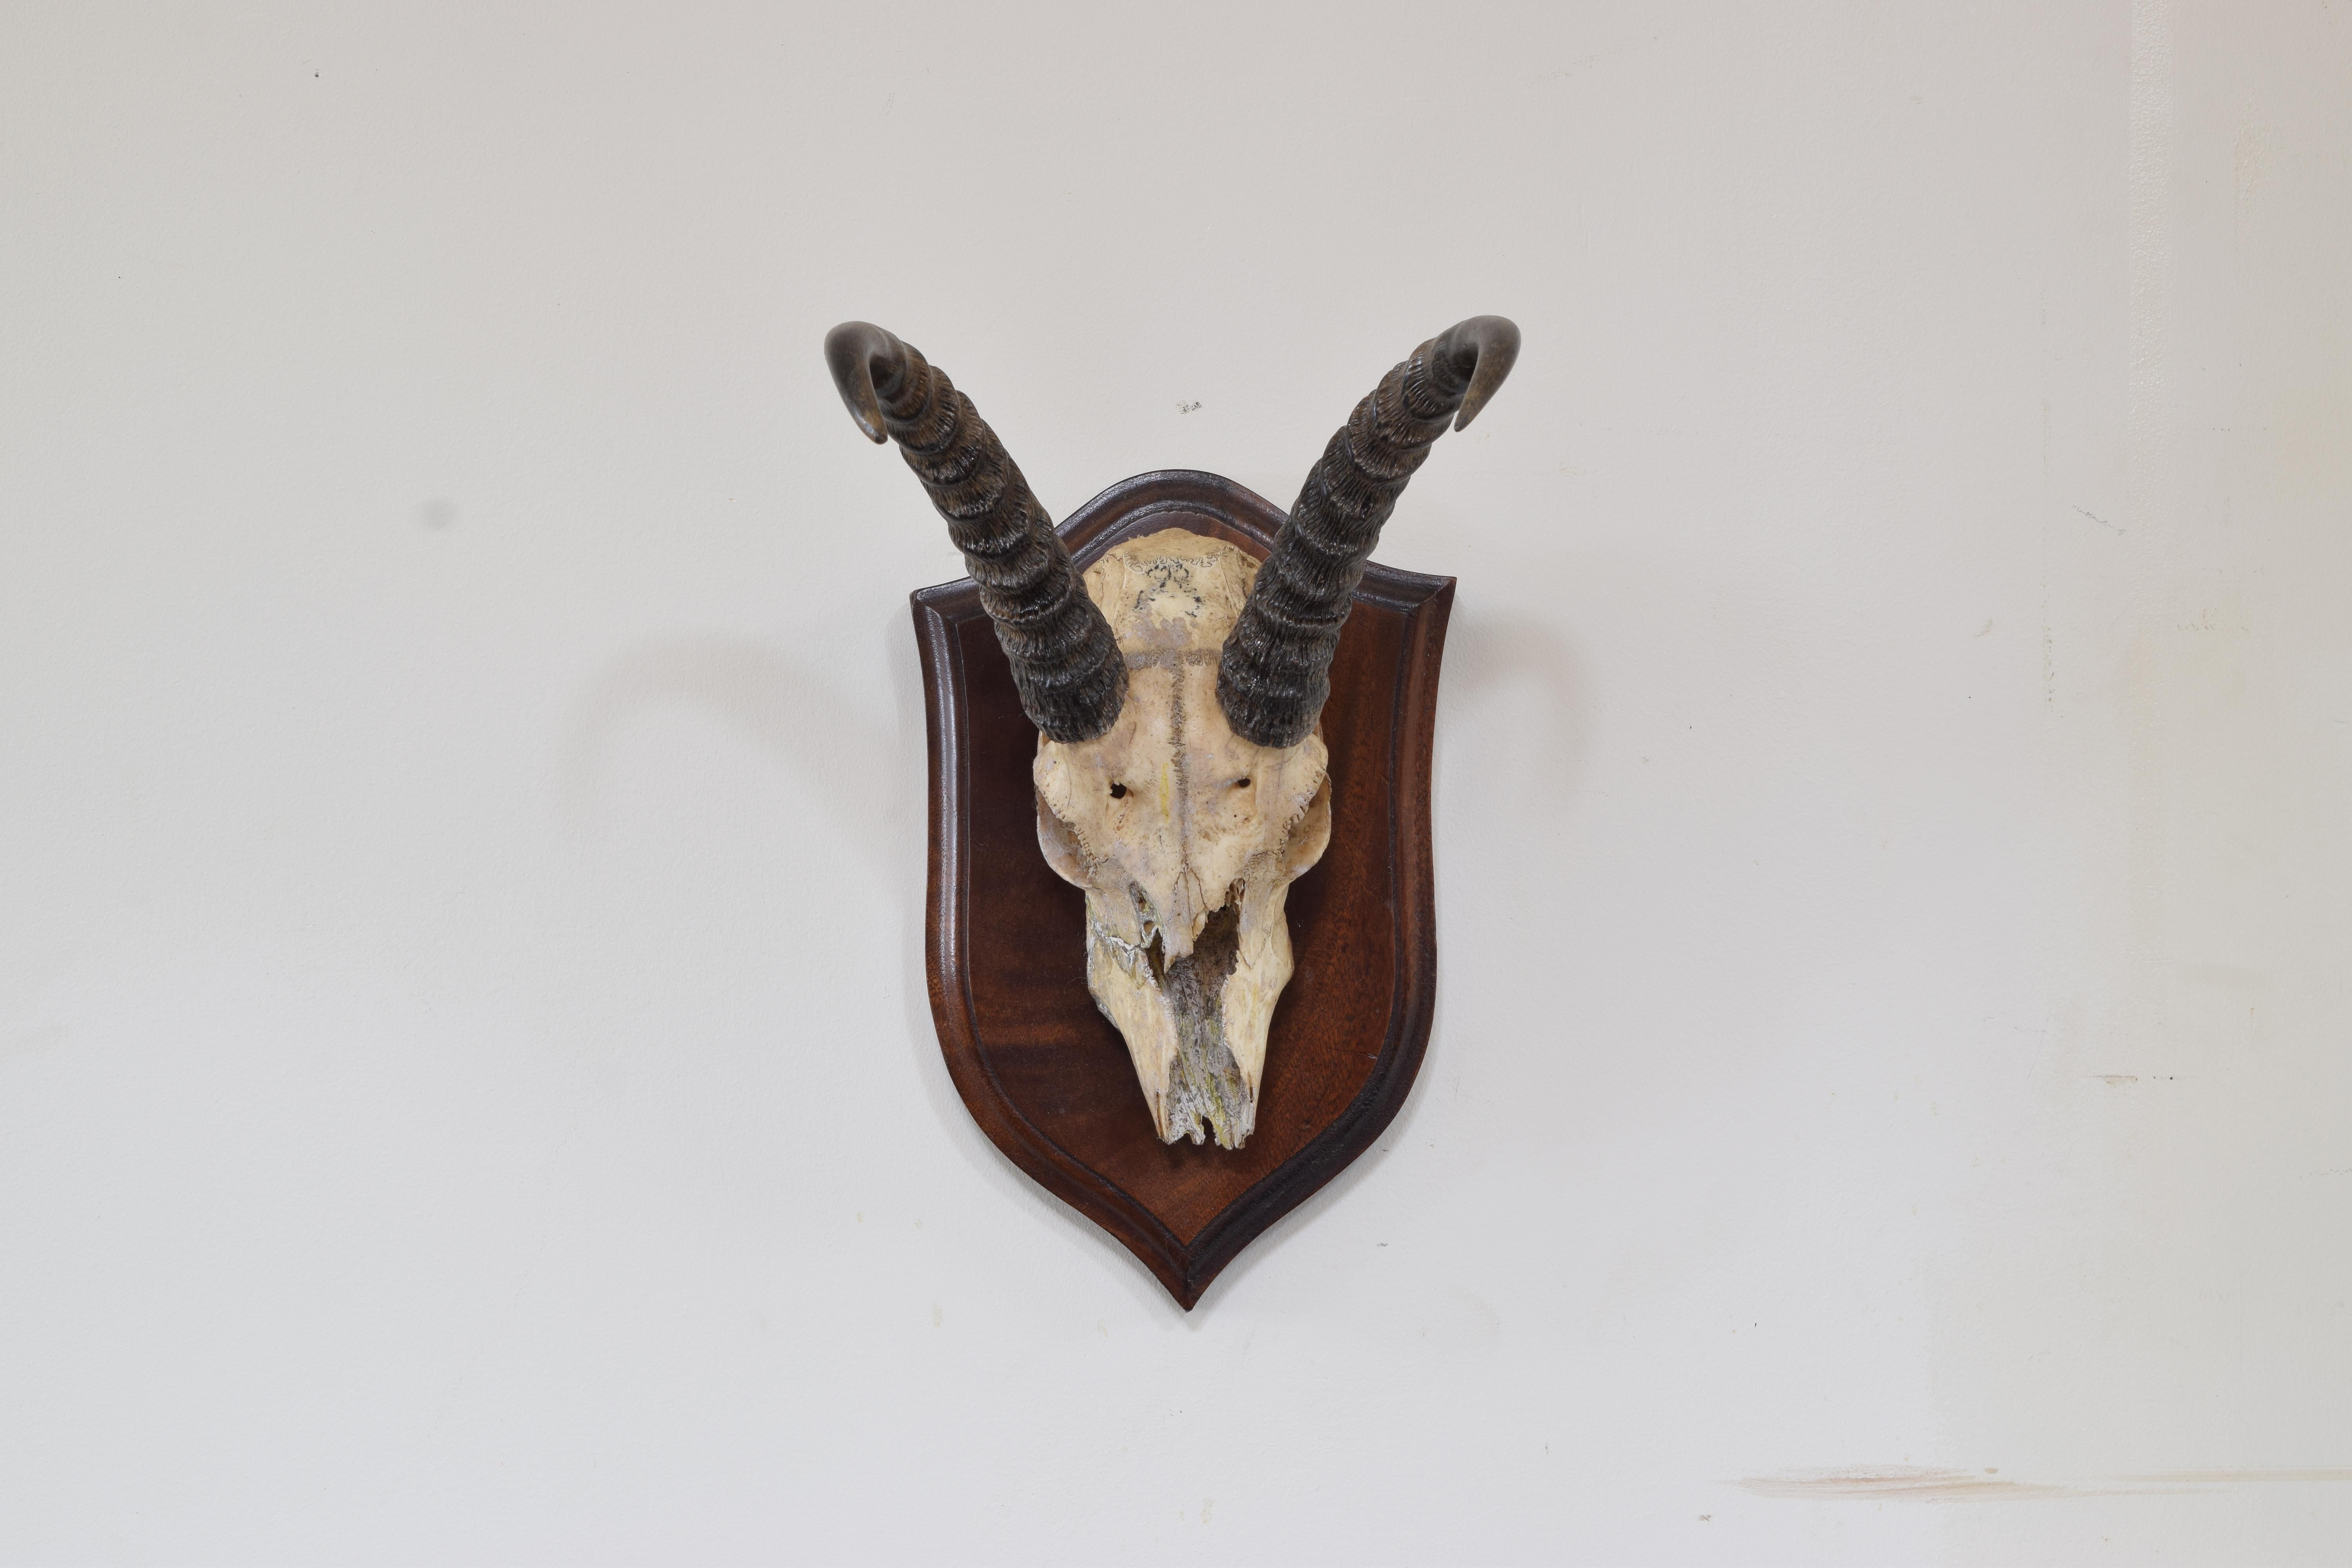 Mounted on a dark walnut backplate, the antlers and partial skull with good patina.